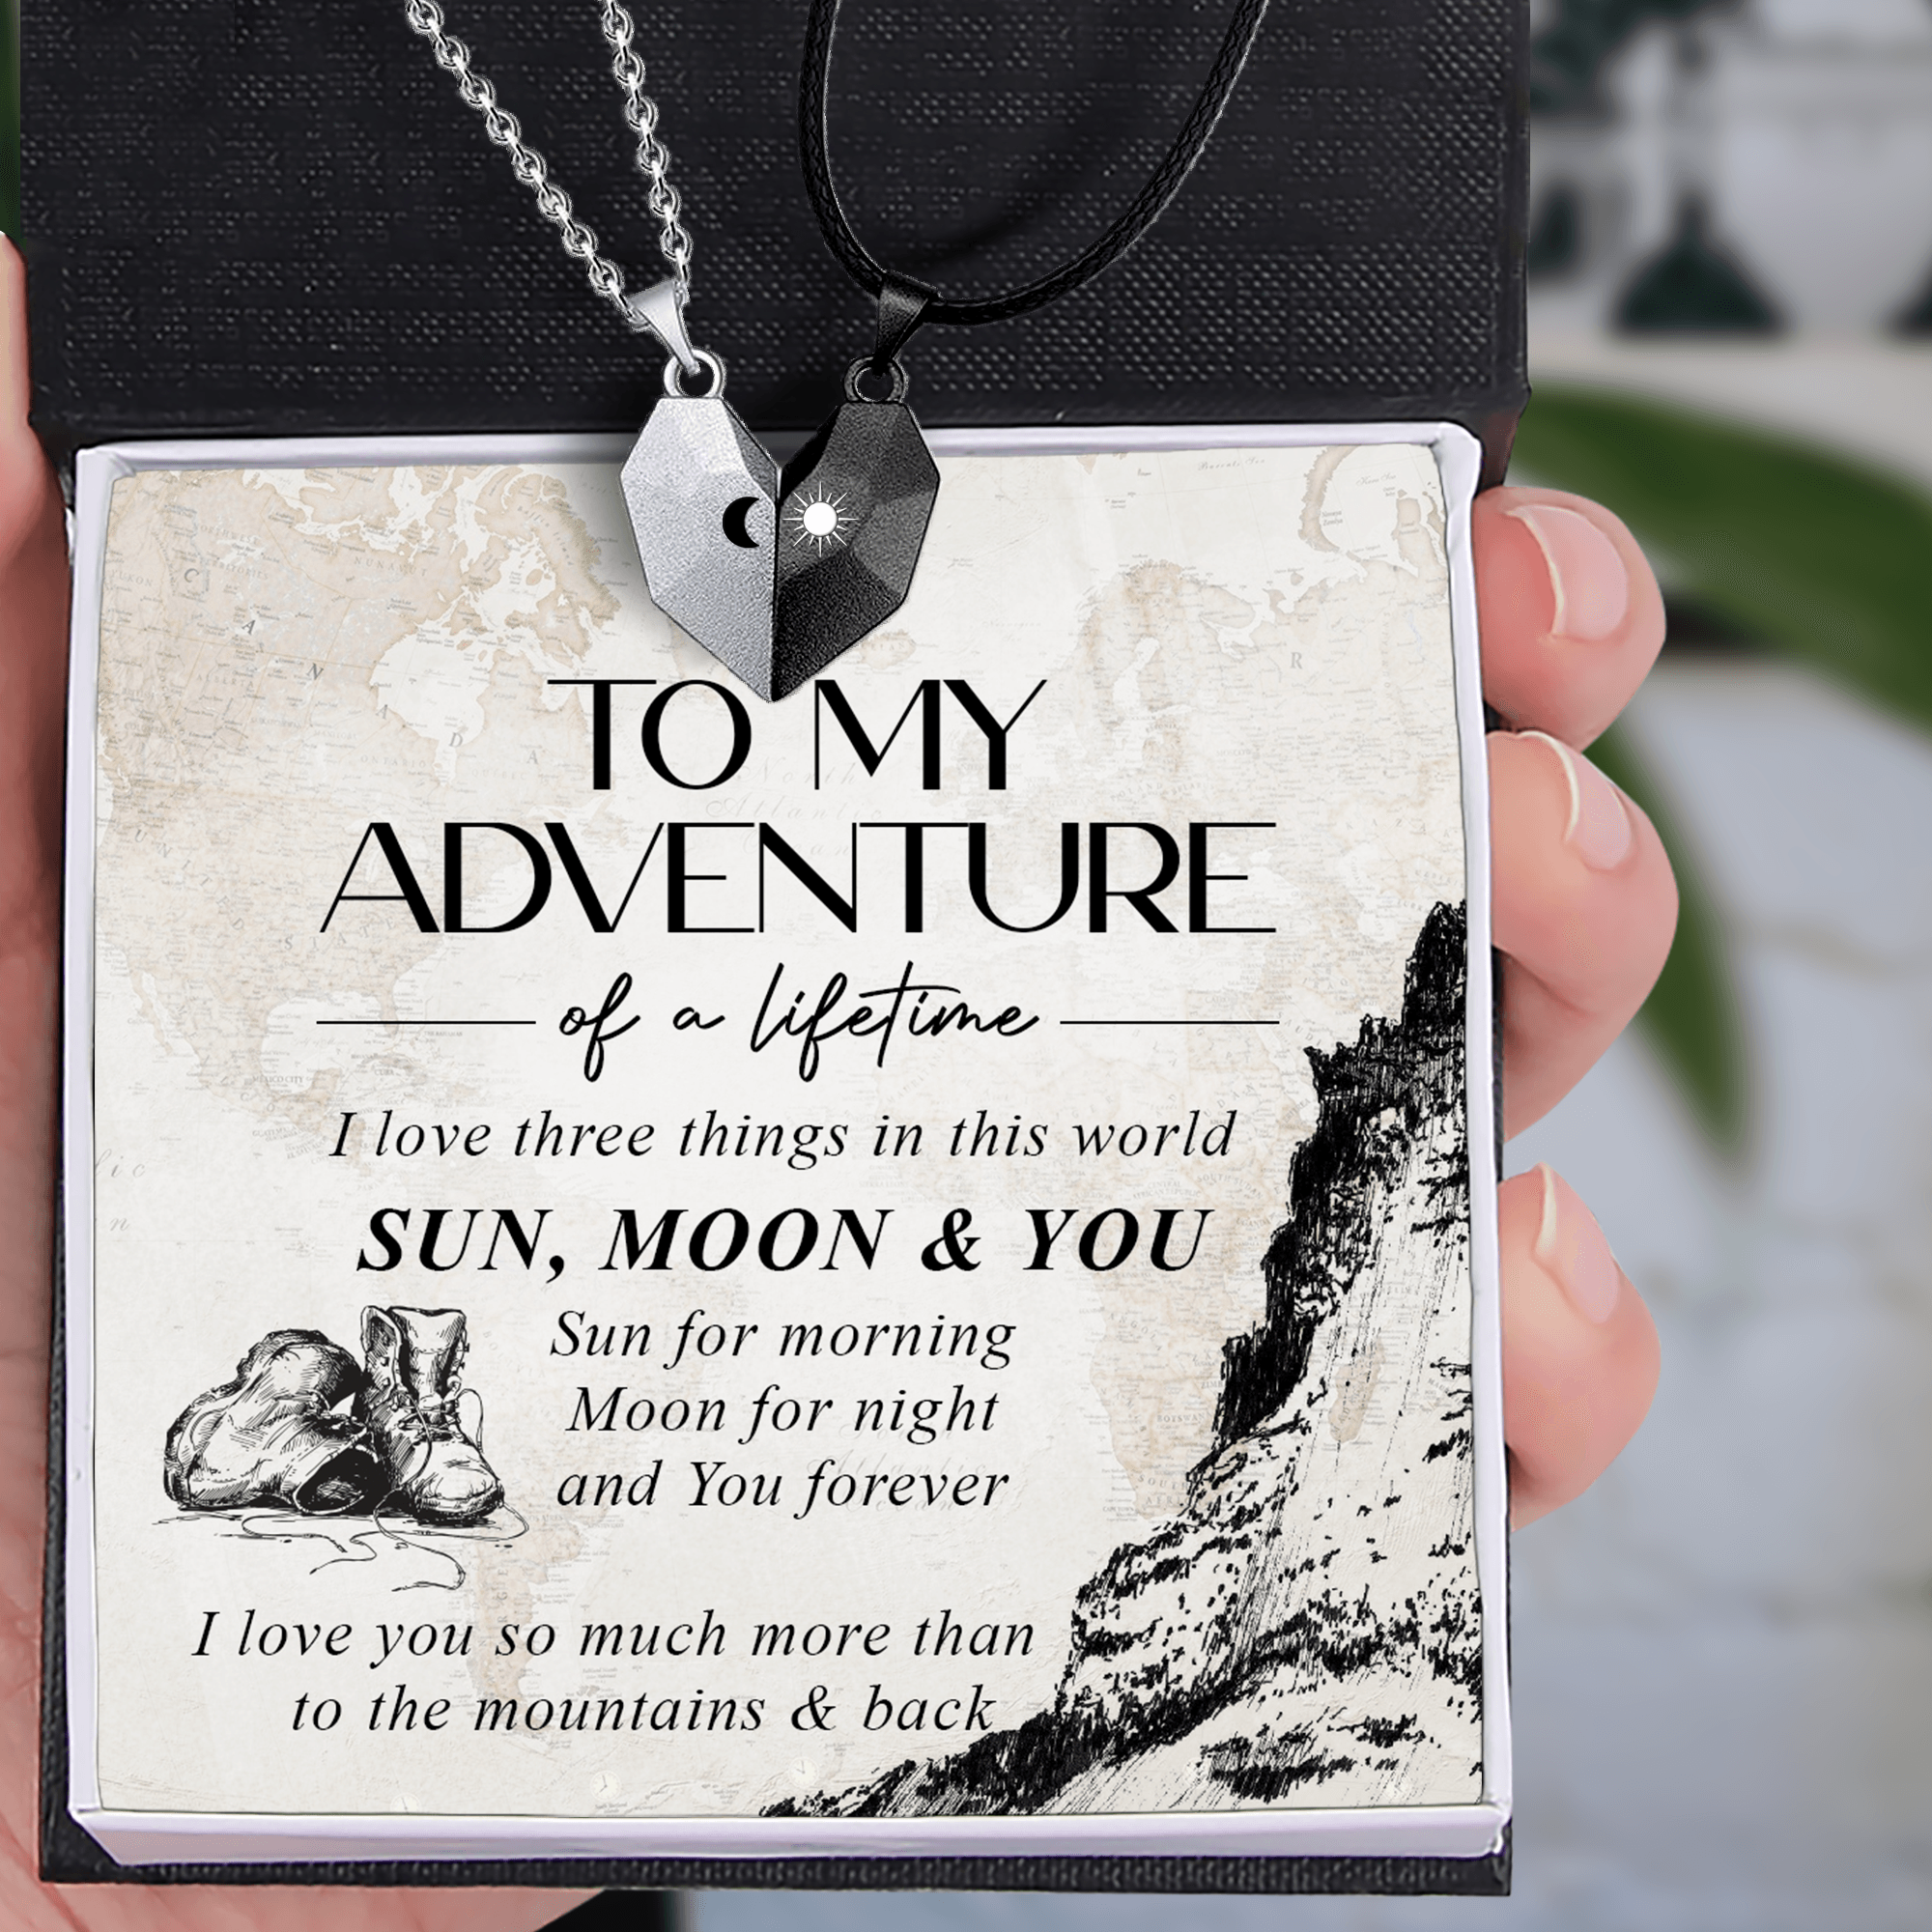 Magnetic Love Necklaces - Hiking - To My Adventure Of A Lifetime - I Love You So Much More Than To The Mountains & Back - Augnni13008 - Gifts Holder